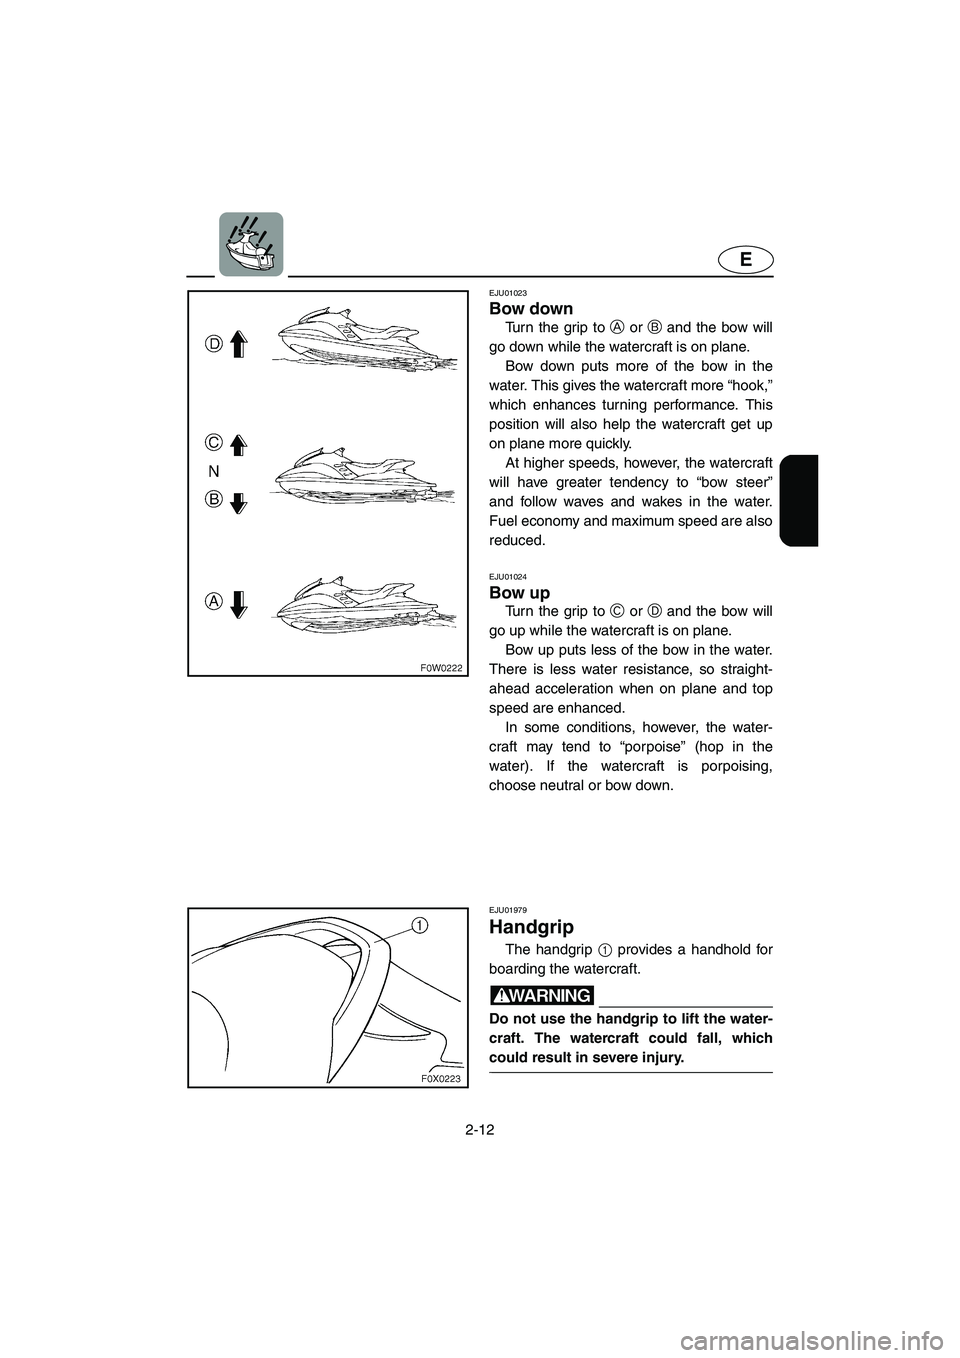 YAMAHA GP800R 2003  Owners Manual 2-12
E
EJU01023 
Bow down  
Turn the grip to A or B and the bow will
go down while the watercraft is on plane. 
Bow down puts more of the bow in the
water. This gives the watercraft more “hook,”
w